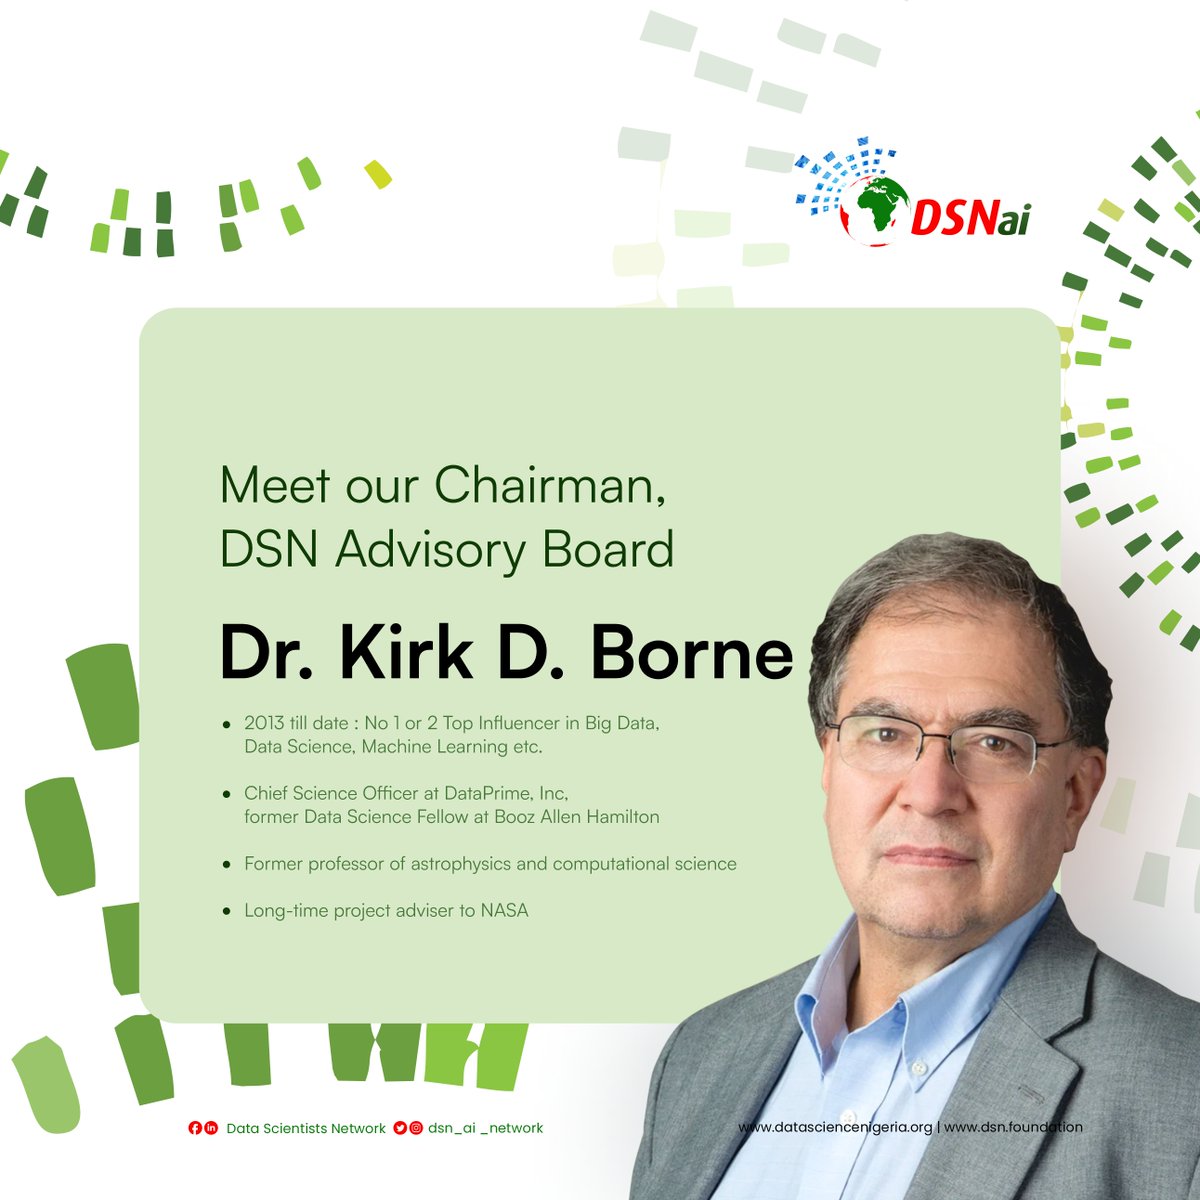 Join us to welcome, @KirkDBorne , the new Chairman, DSN Advisory Board An award-winning and top global influencer in Data Science, AI, Machine Learning etc. A former professor of astrophysics and computational science with outstanding achievements More: bit.ly/DSN_Chair